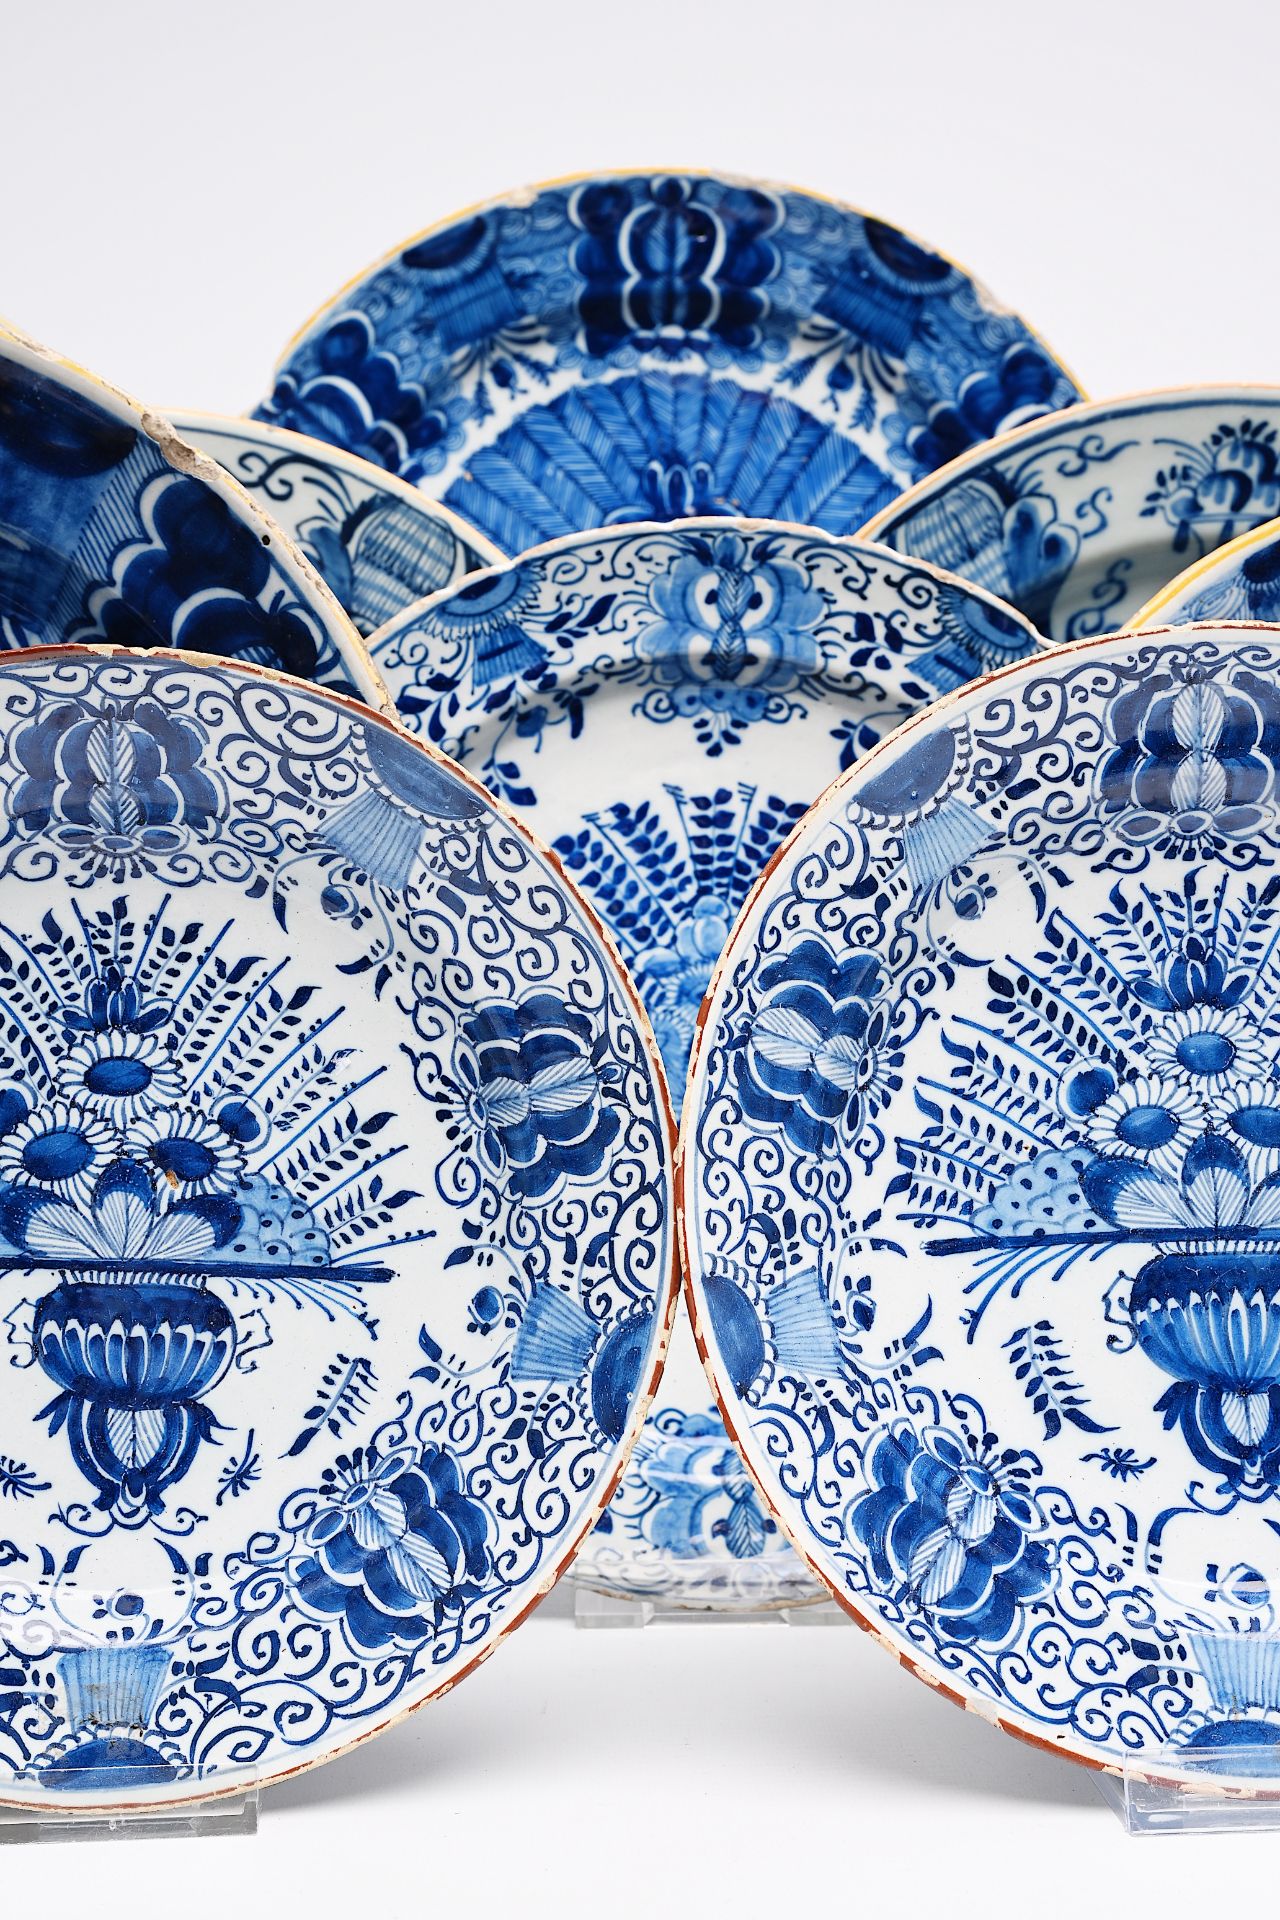 Sixteen Dutch Delft blue and white 'peacock tail' plates and dishes, 18th C. - Image 3 of 6